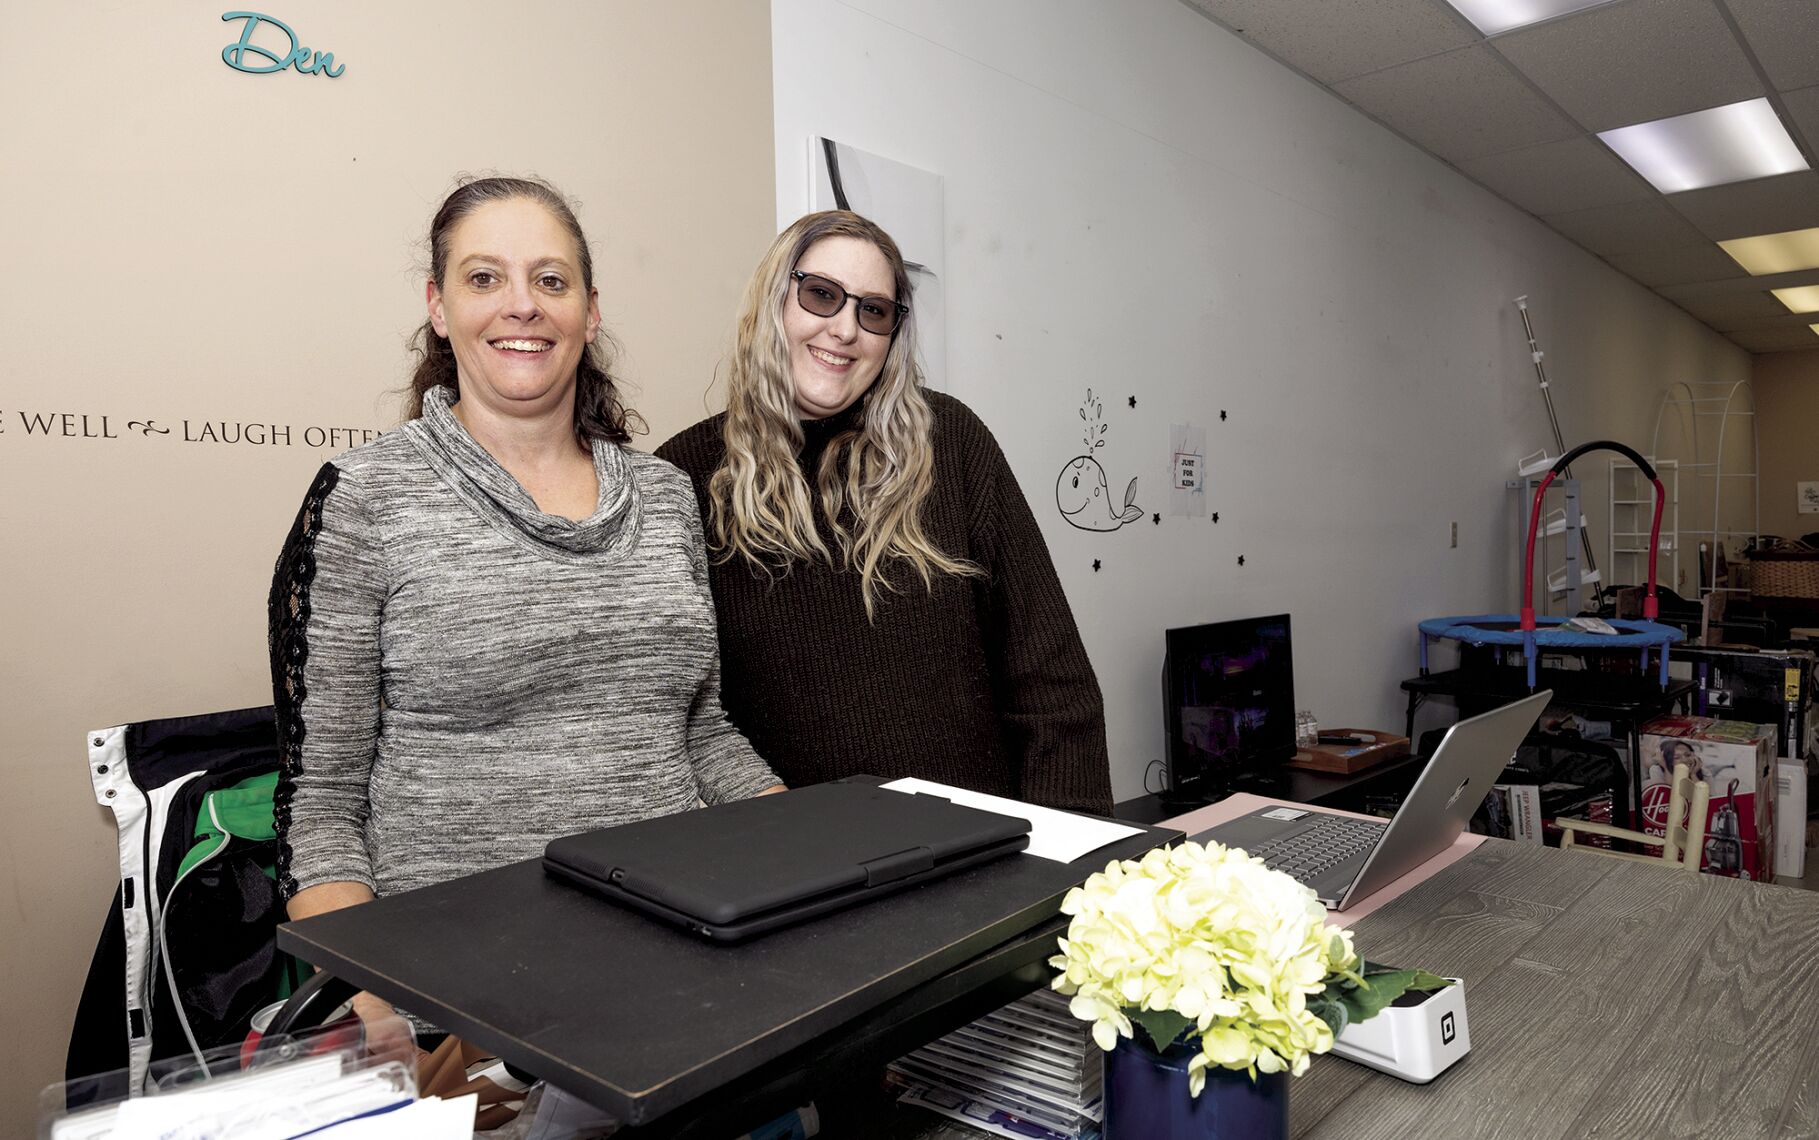 Owners Shelly Hess (left) and Mikaylah Veglahn inside their new store, Surprise Den, in Dyersville, Iowa on Friday, March 17, 2023.    PHOTO CREDIT: Stephen Gassman